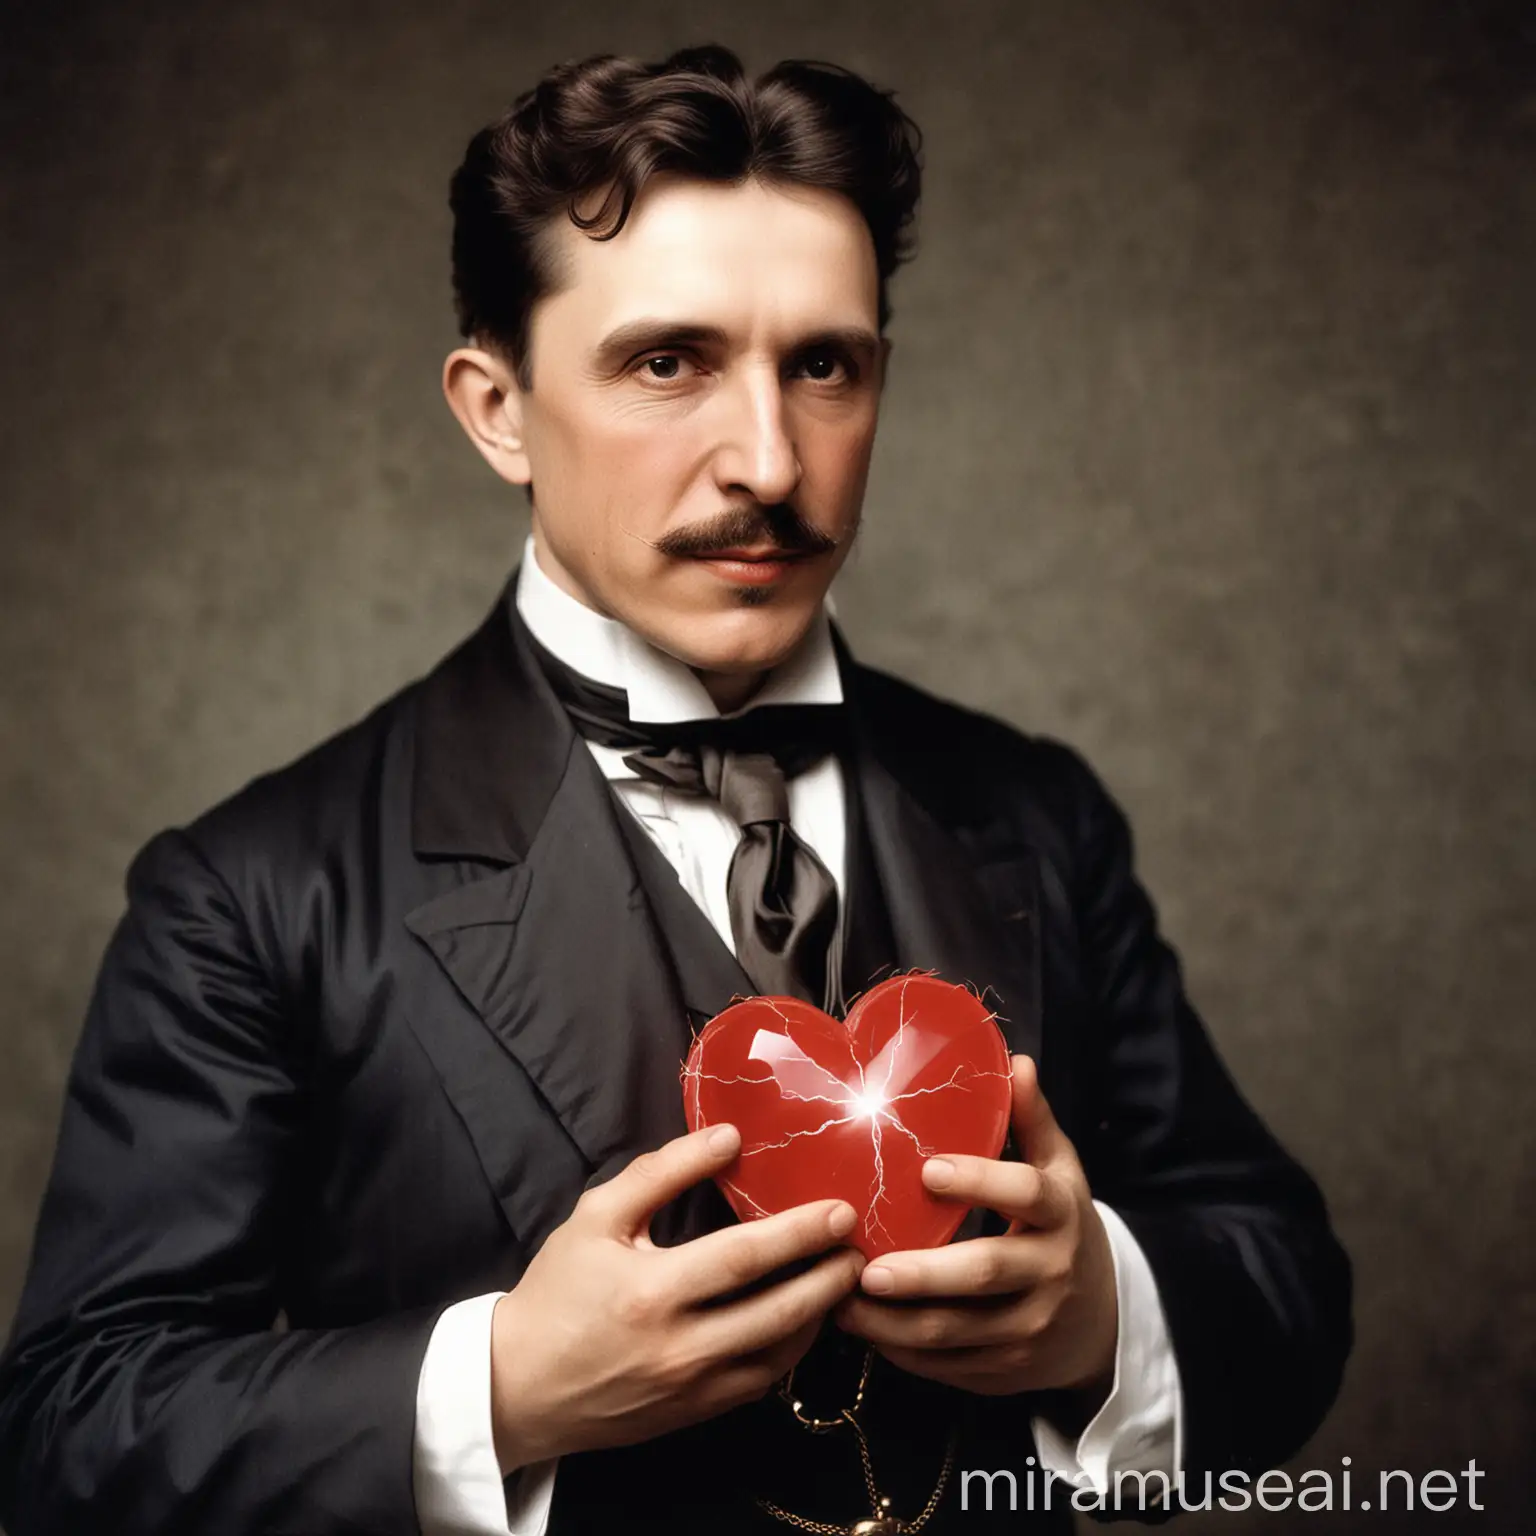 Nicola Tesla Holding Heart Innovative Vision in Love and Technology